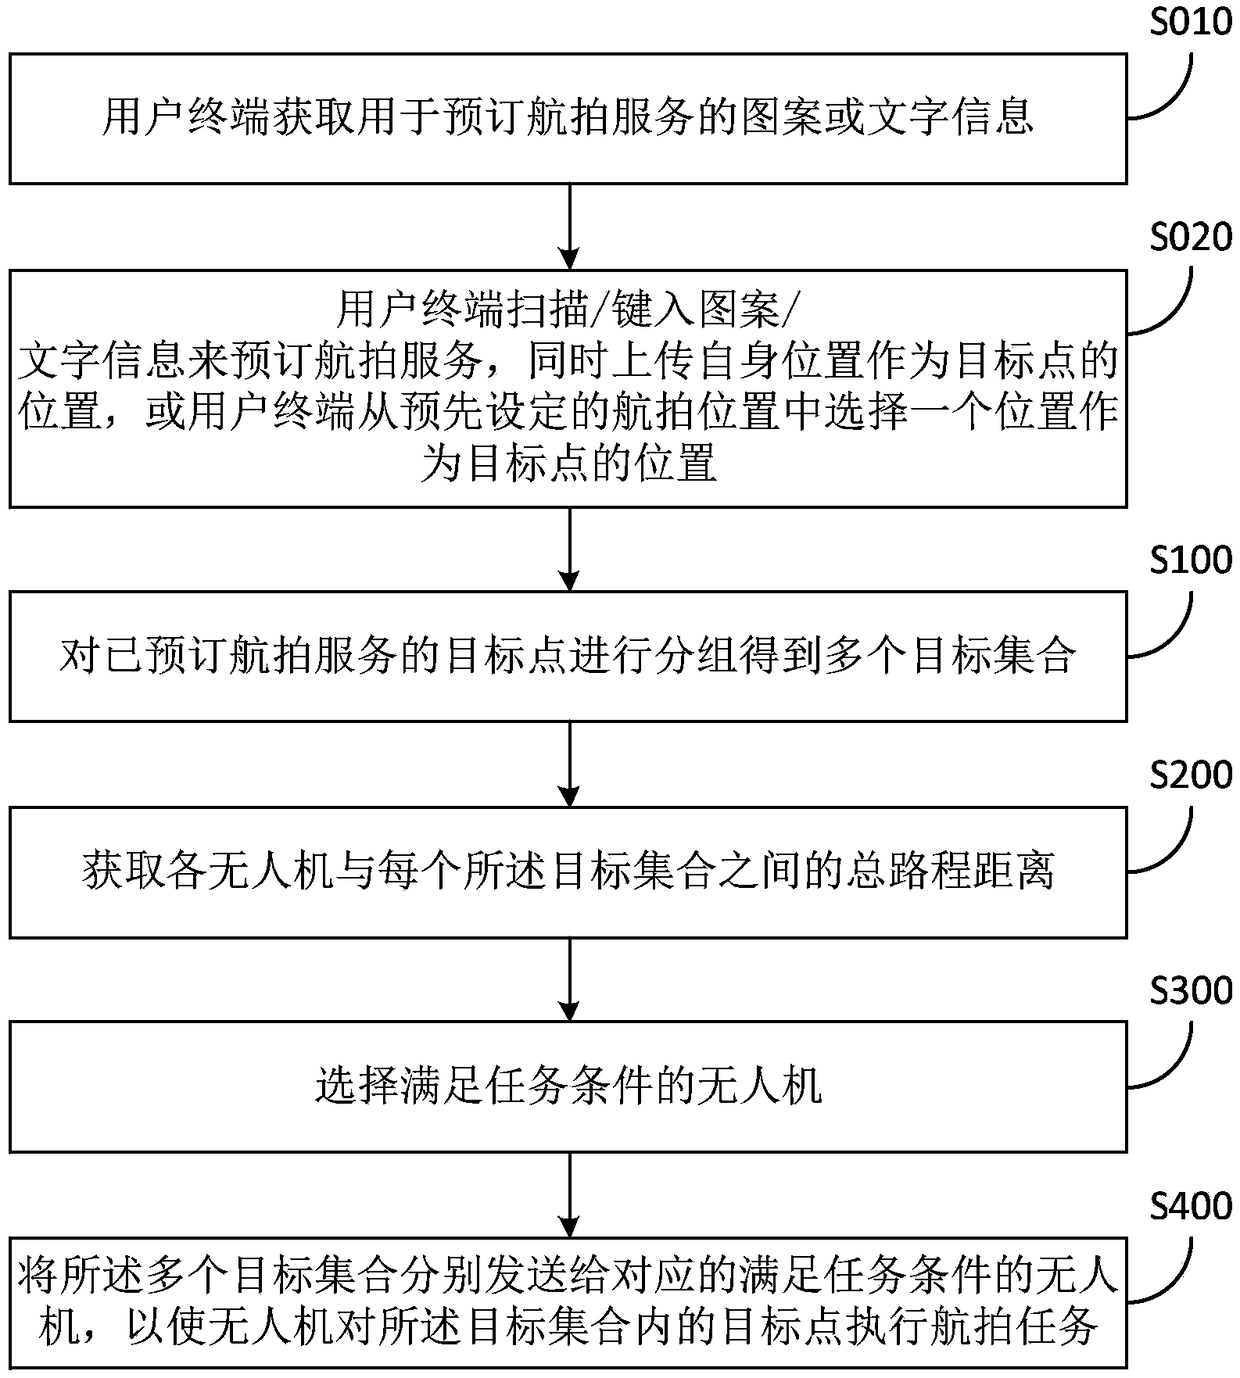 Unmanned aerial vehicle path planning method for aerial photography and management system